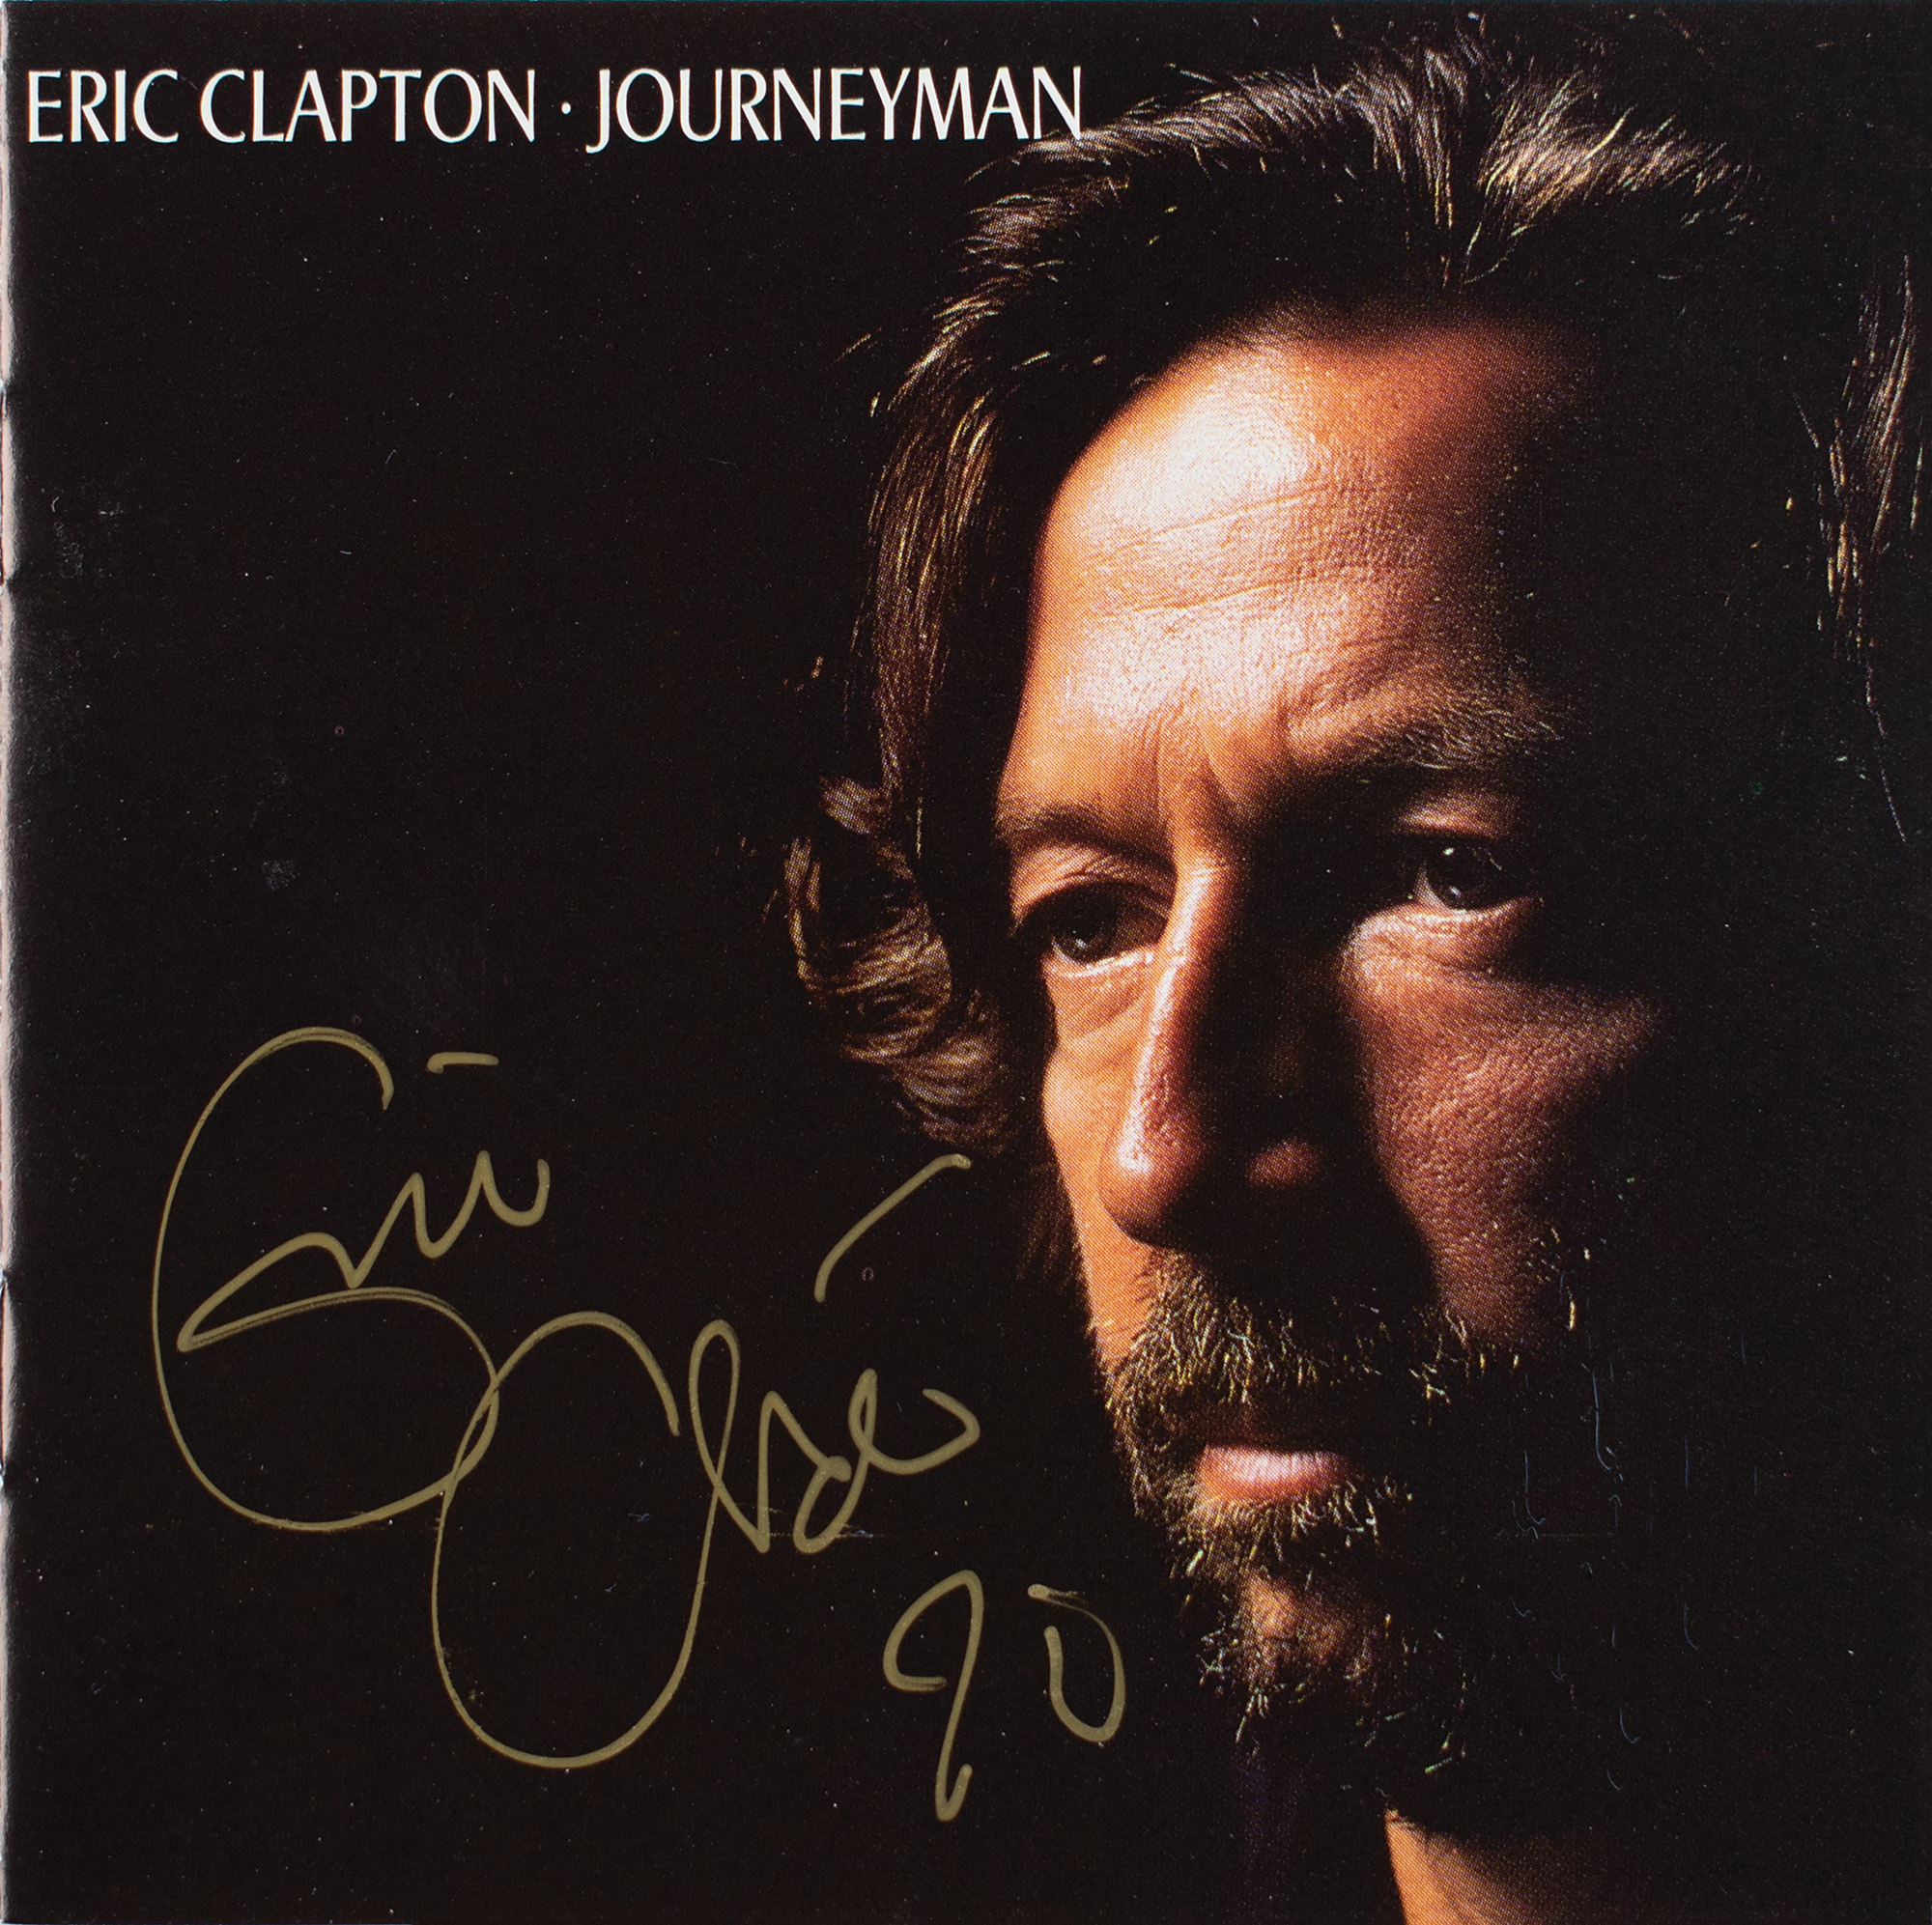 Lot #5280 Eric Clapton Signed CD